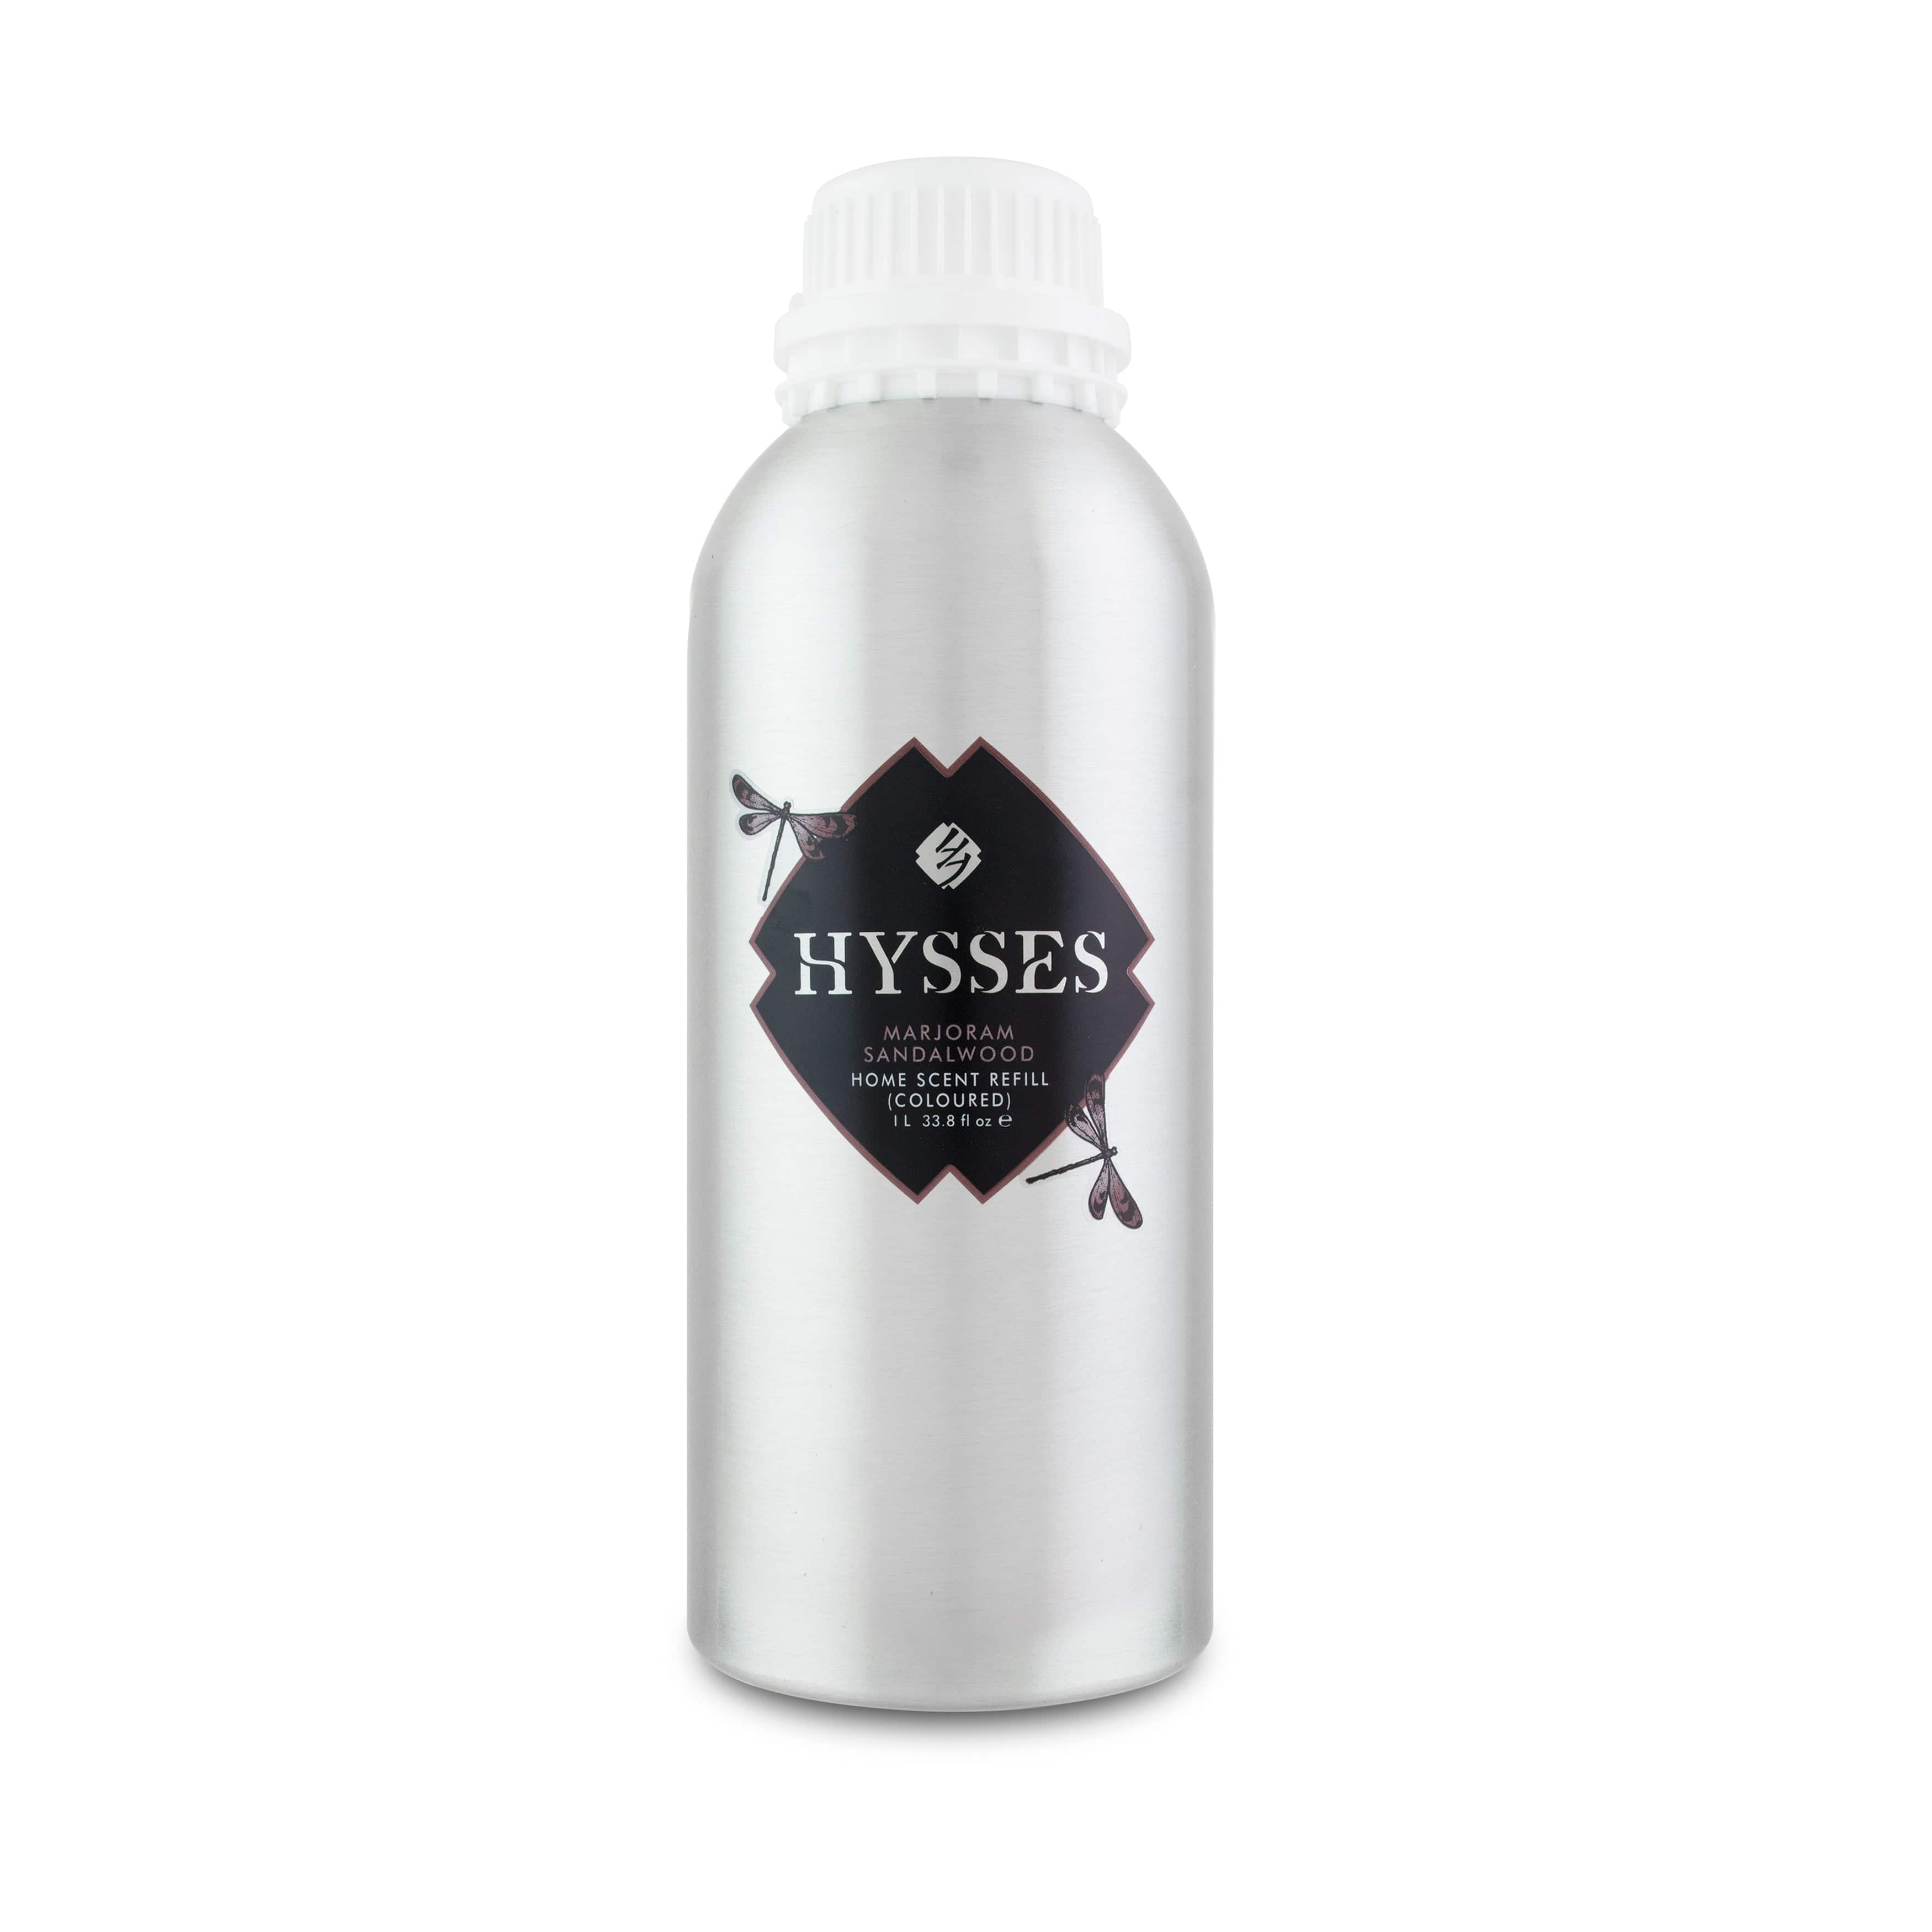 Hysses Home Scents 1L Refill Home Scent Marjoram Sandalwood (Green Coloured) 1L